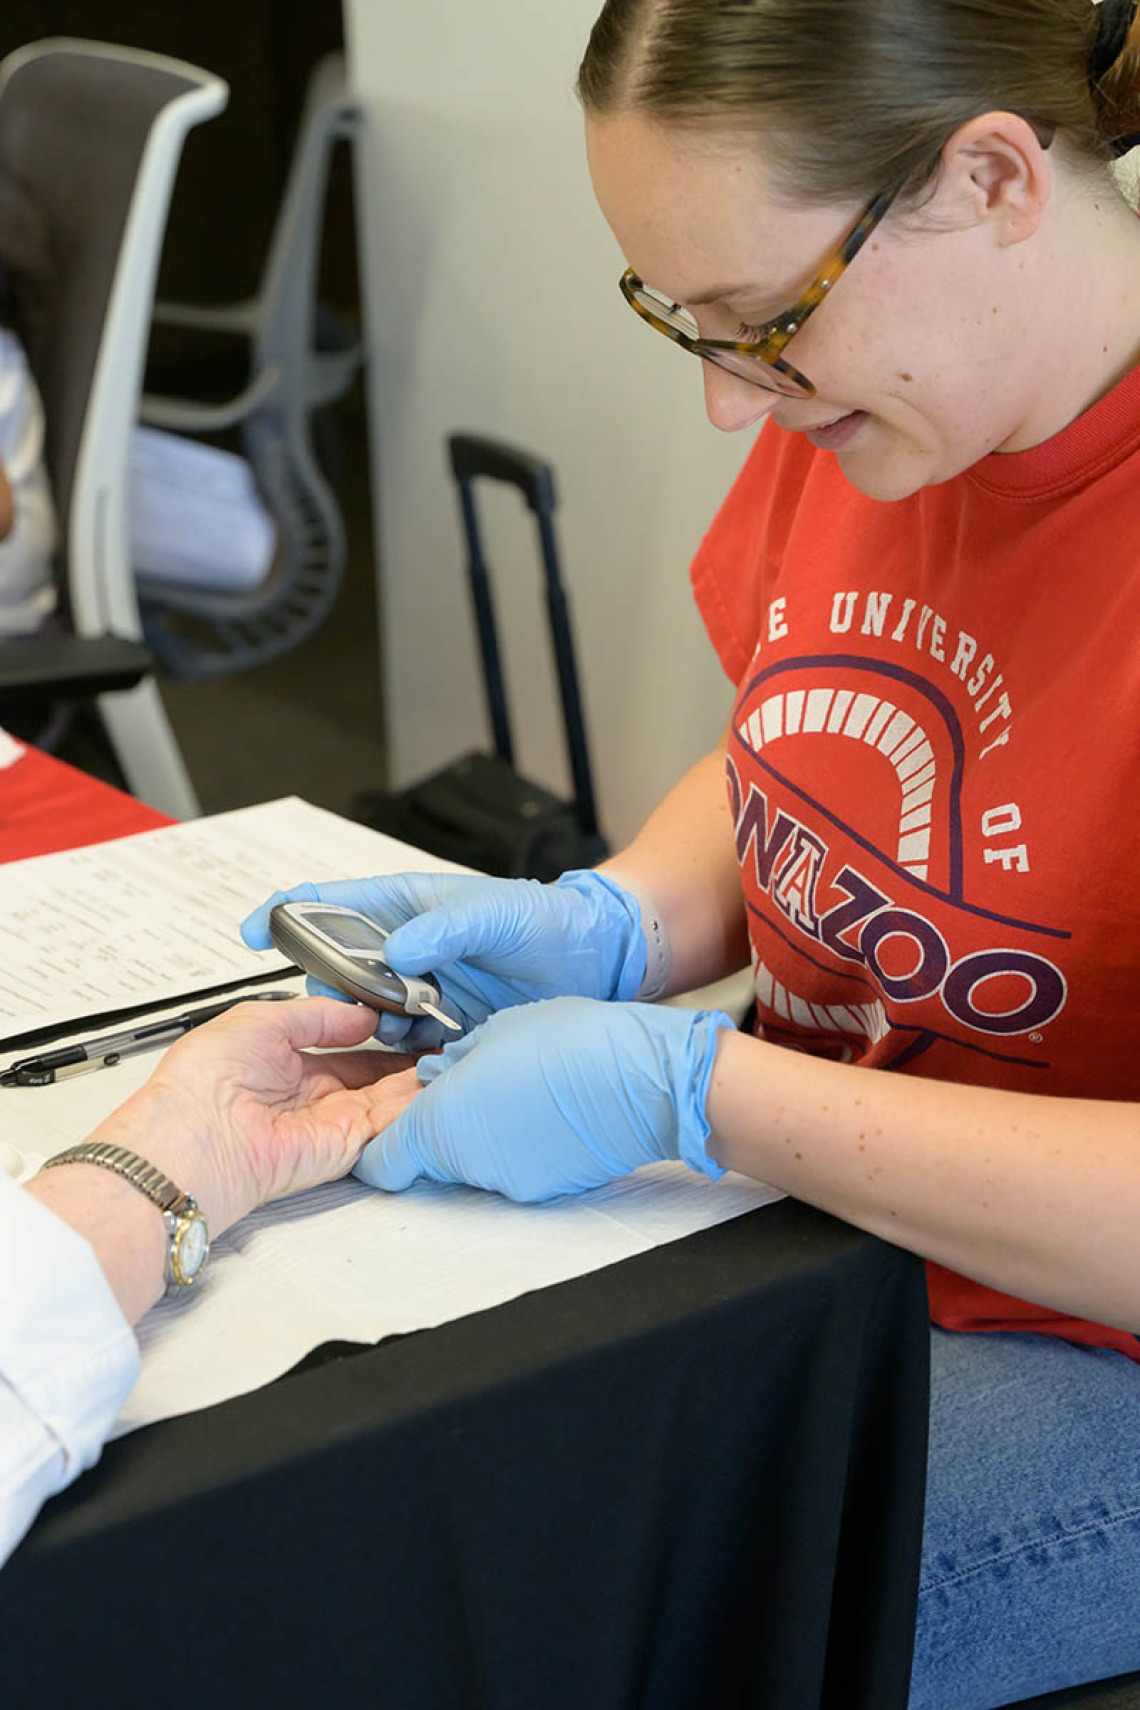 A woman in a red University of Arizona t-shirt wearing medical gloves takes a blood sample from the finger of someone's hand.